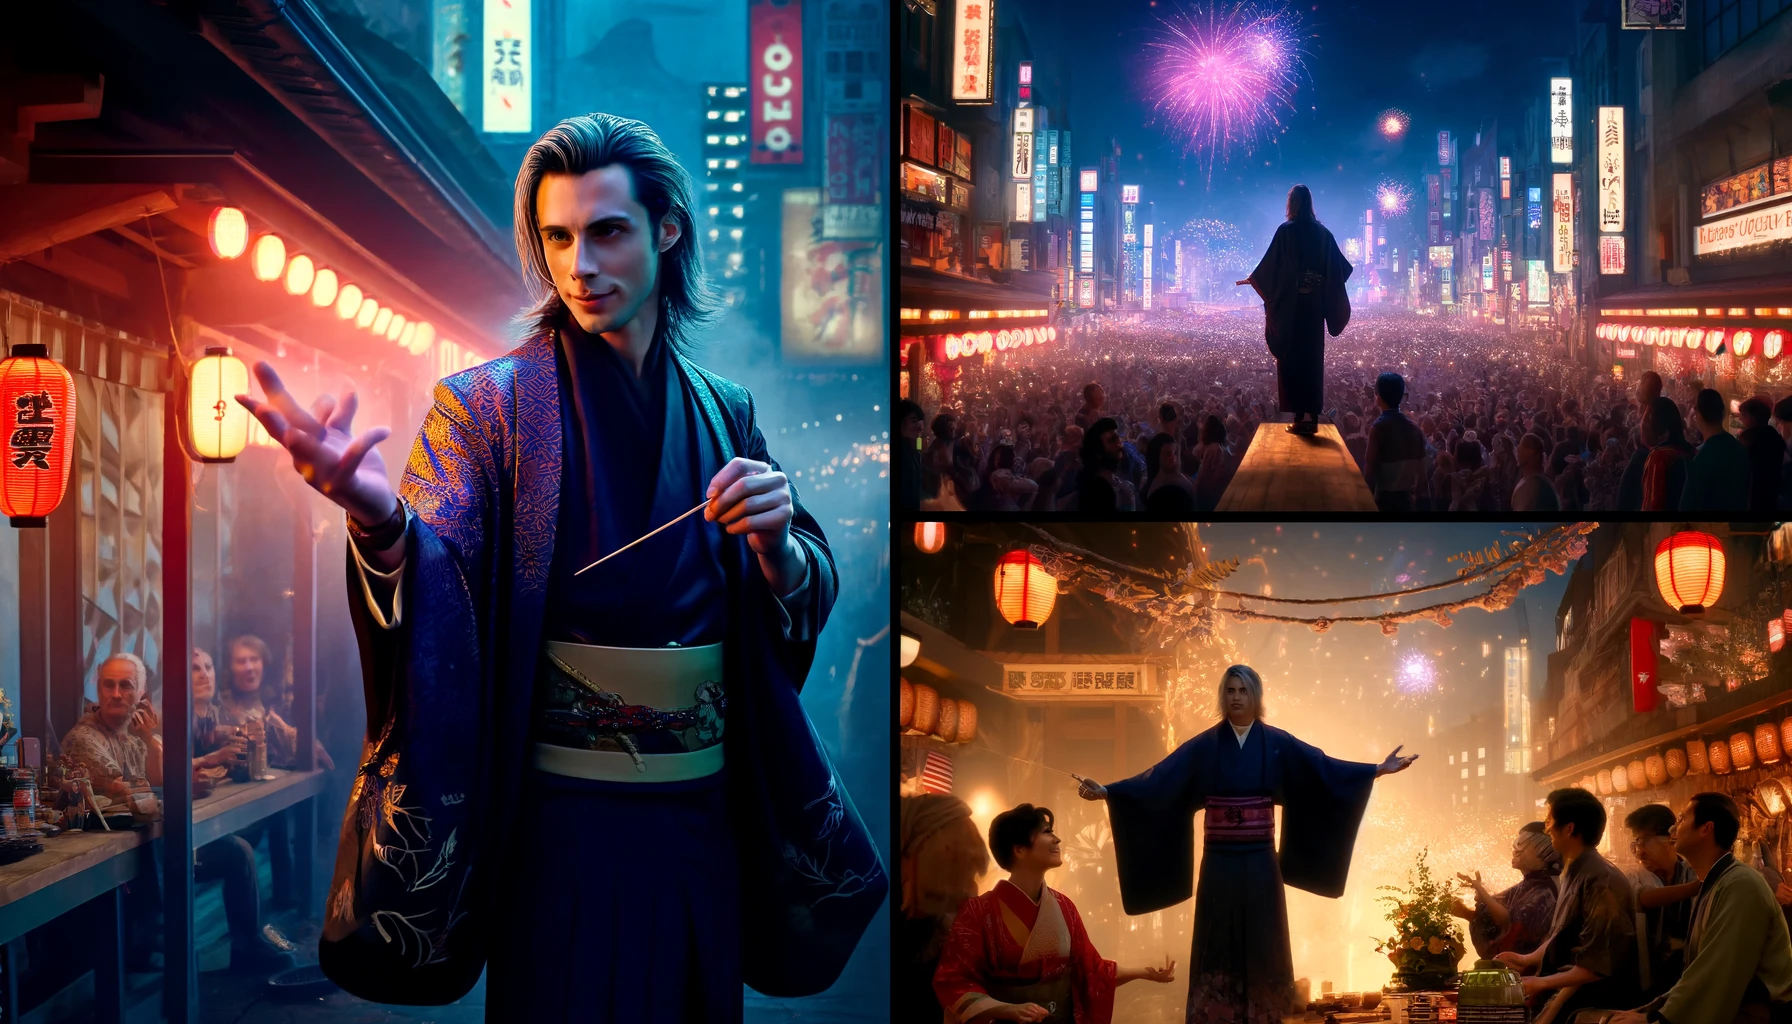 A scene depicting a beloved villain from a fantasy film about a young wizard, set in a Japanese urban landscape. The villain, a charismatic and stylish character, is seen casting a spell amidst the neon lights of Tokyo, with traditional elements like a Shinto shrine in the background. The scene captures a mix of modern and ancient aesthetics, reflecting the villain's unique appeal in Japan. The second image shows the same villain at a bustling festival, wearing a yukata, interacting with enchanted festival goers under a sky filled with fireworks.